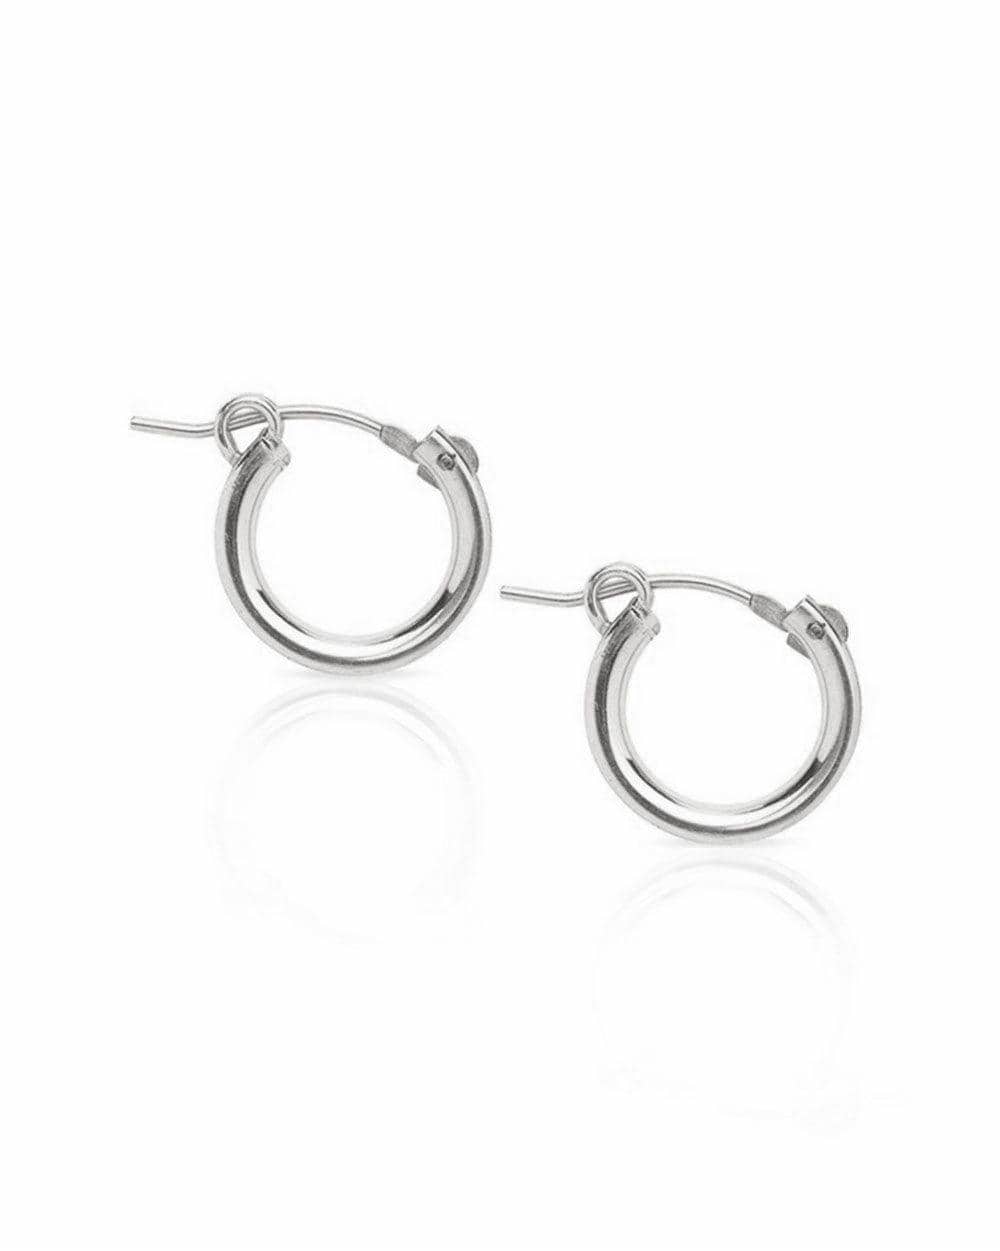 Andy 15mm Classic Hoops